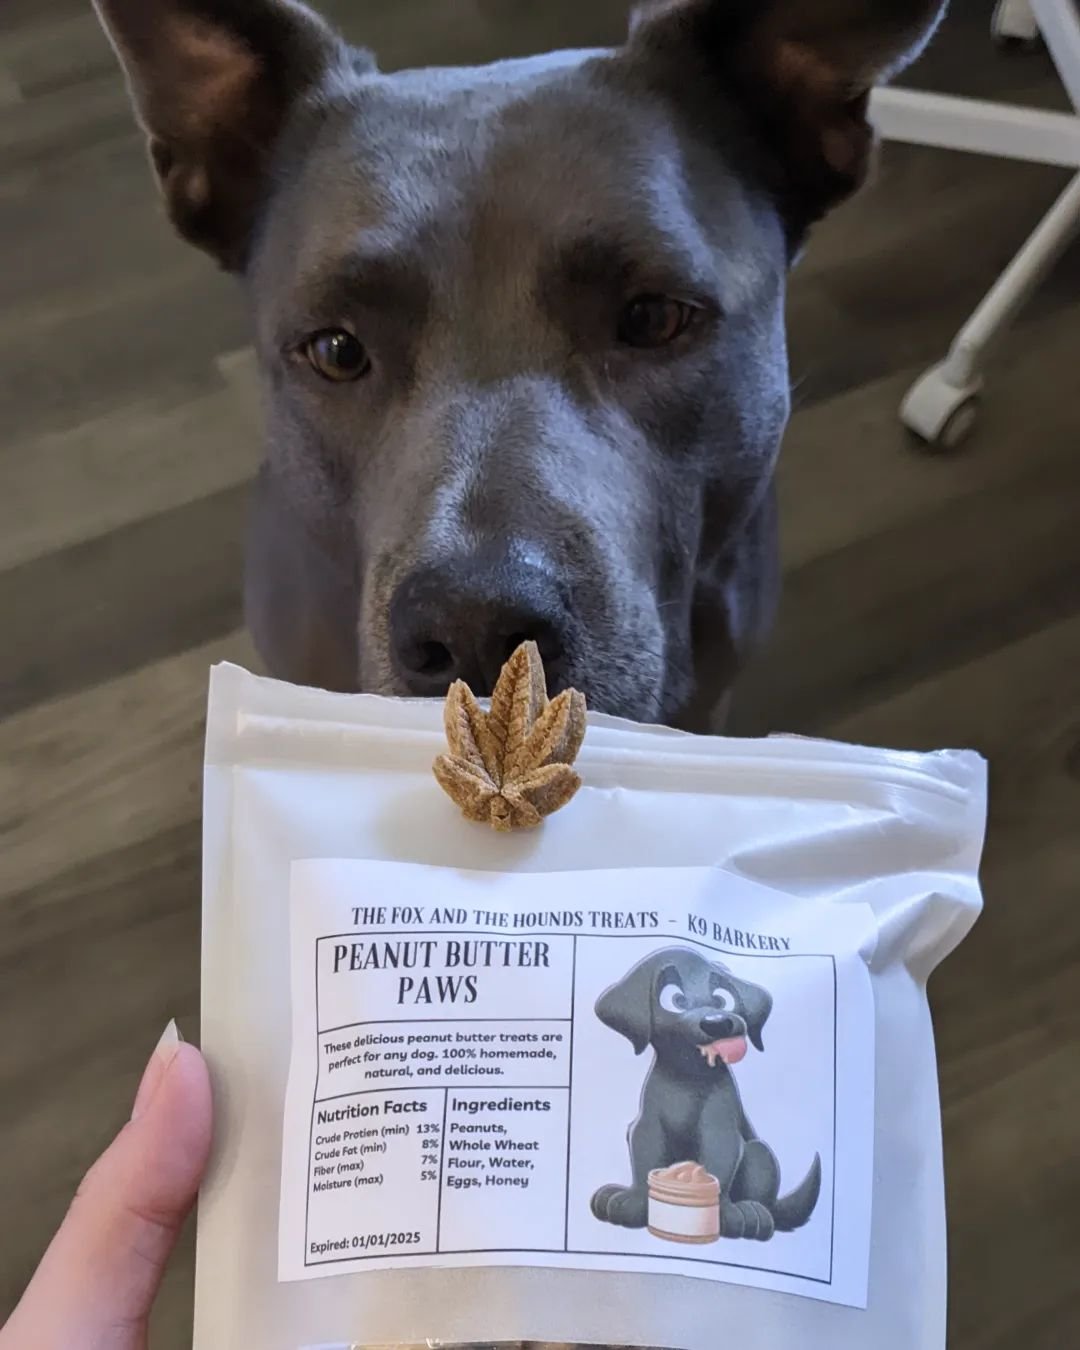 Our VP of Taste Testing is hard at work today making sure we've got the good snacks for the special day tomorrow 🫠😉
These yummy treats contain no hemp, CBD or THC products, just wholesome peanut butter! They are just fun shapes! Grab yours tomorrow